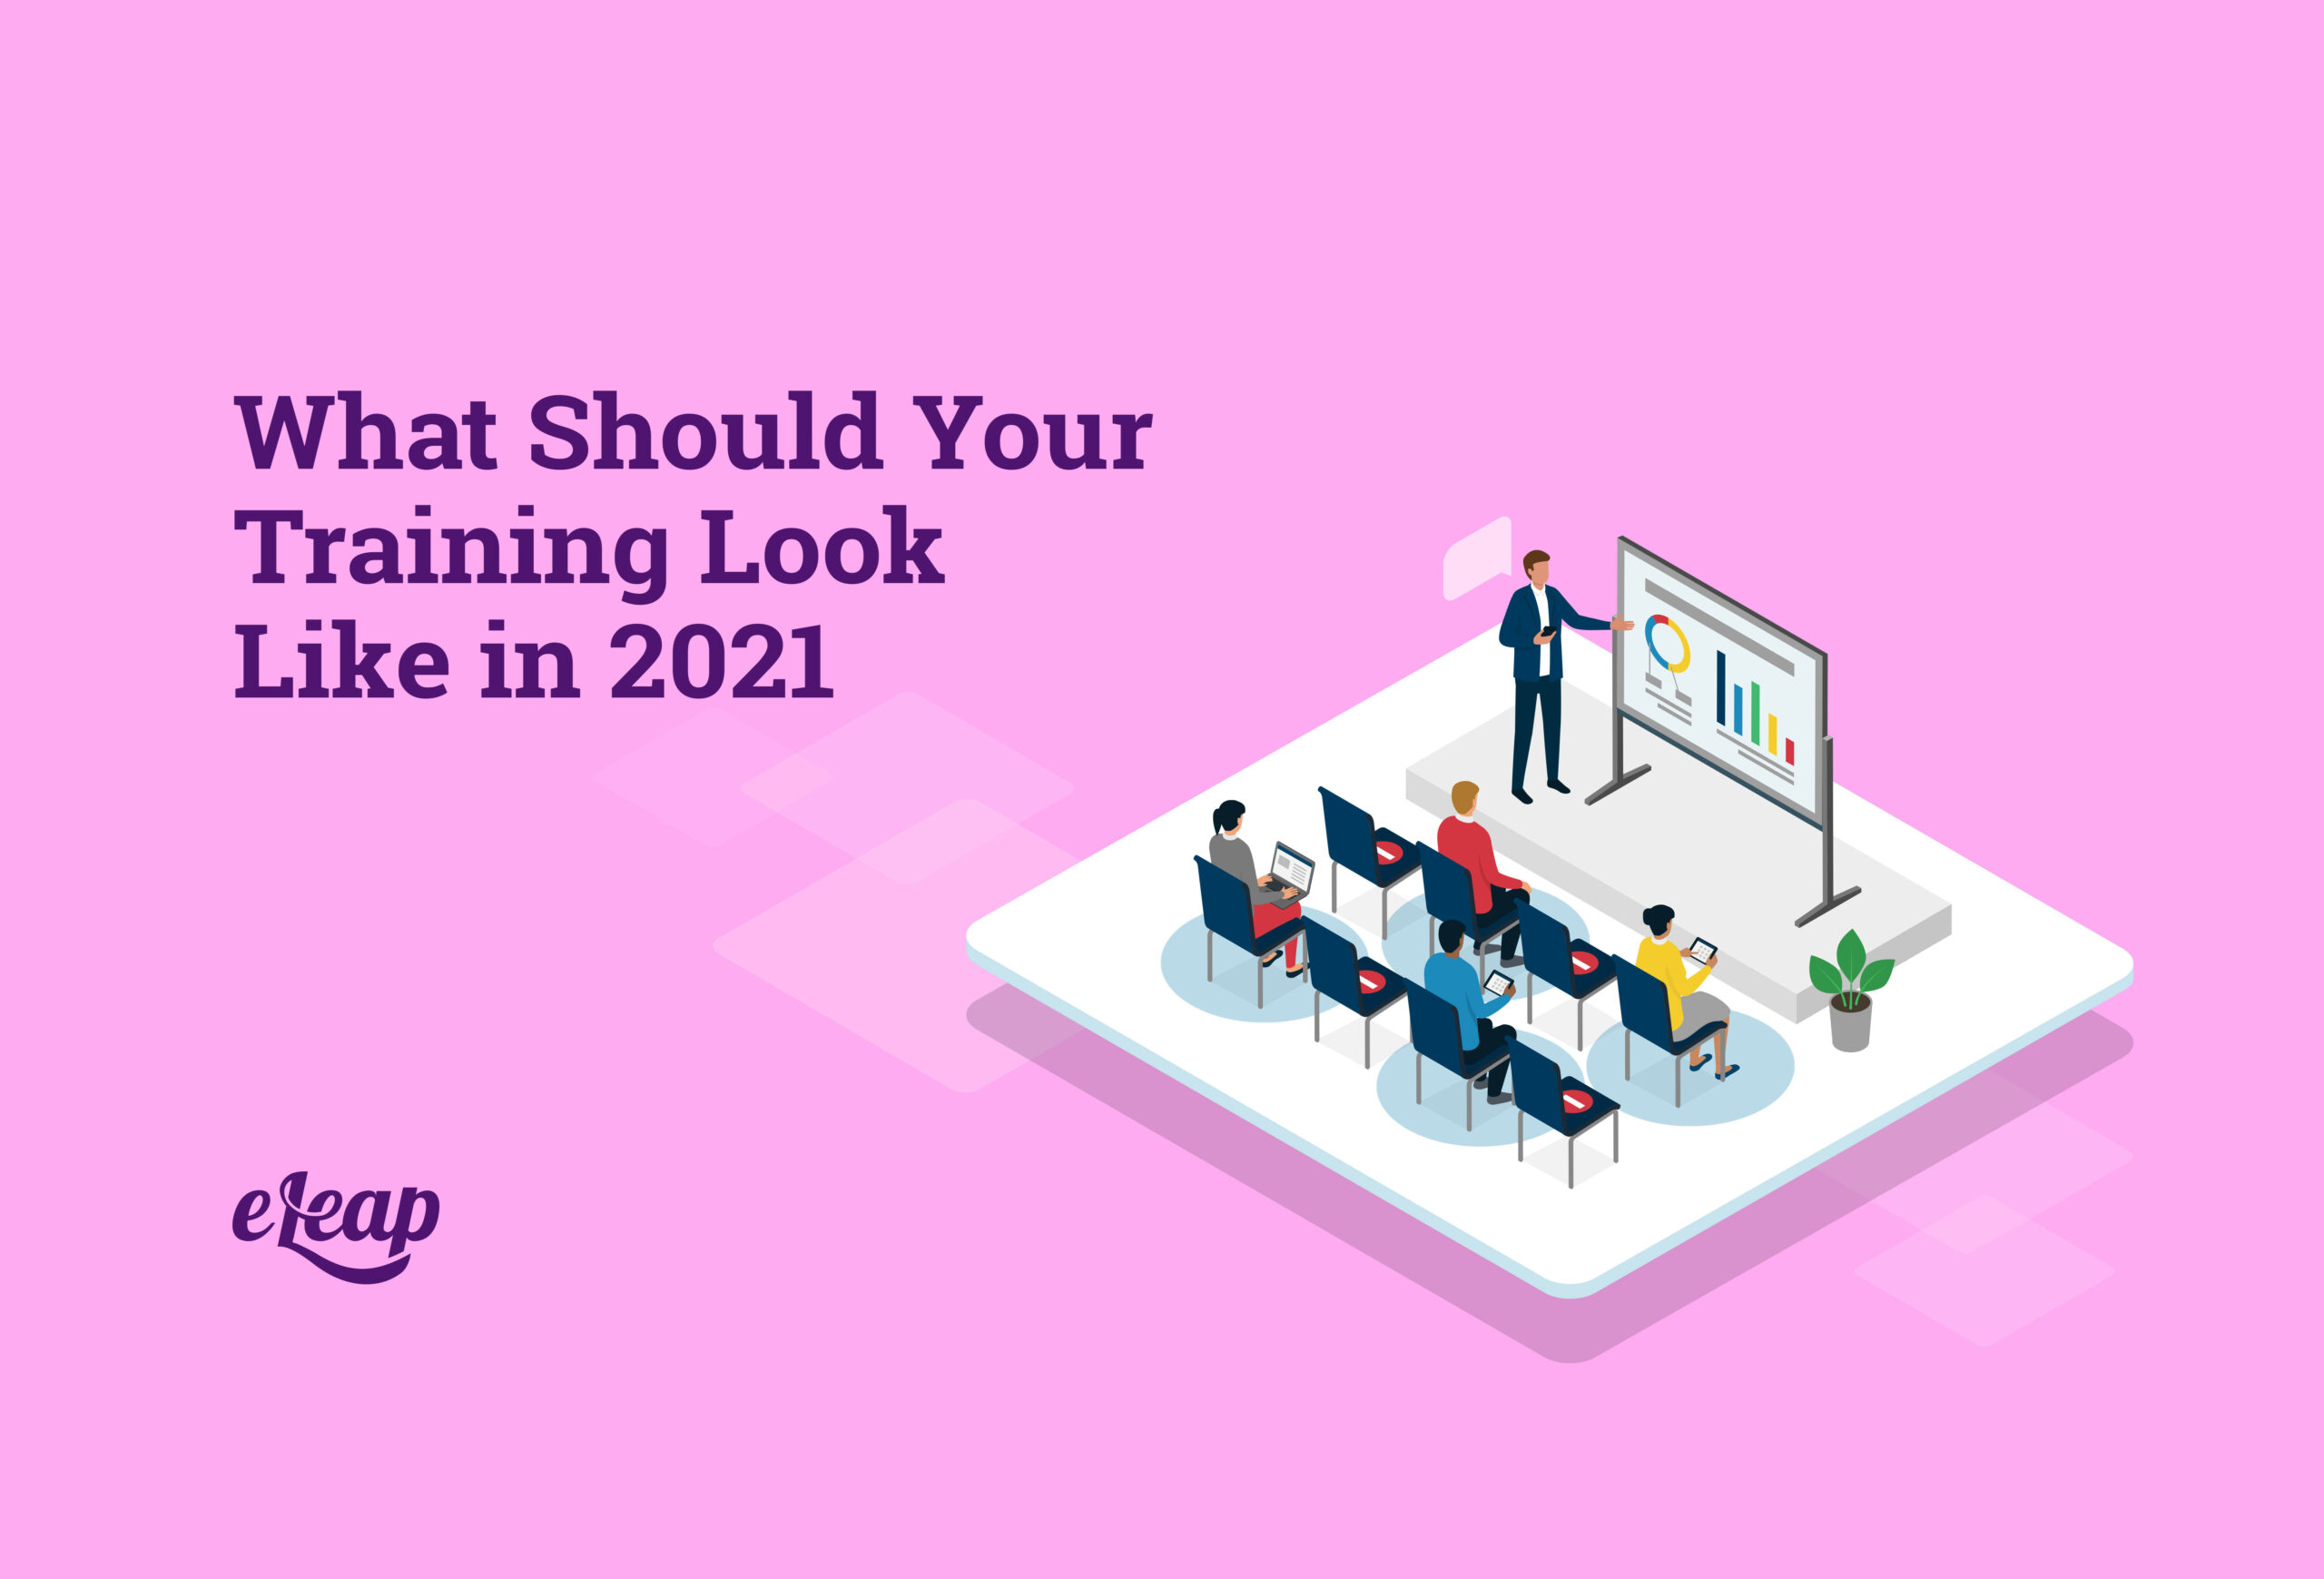 What Should Your Training Look Like in 2021